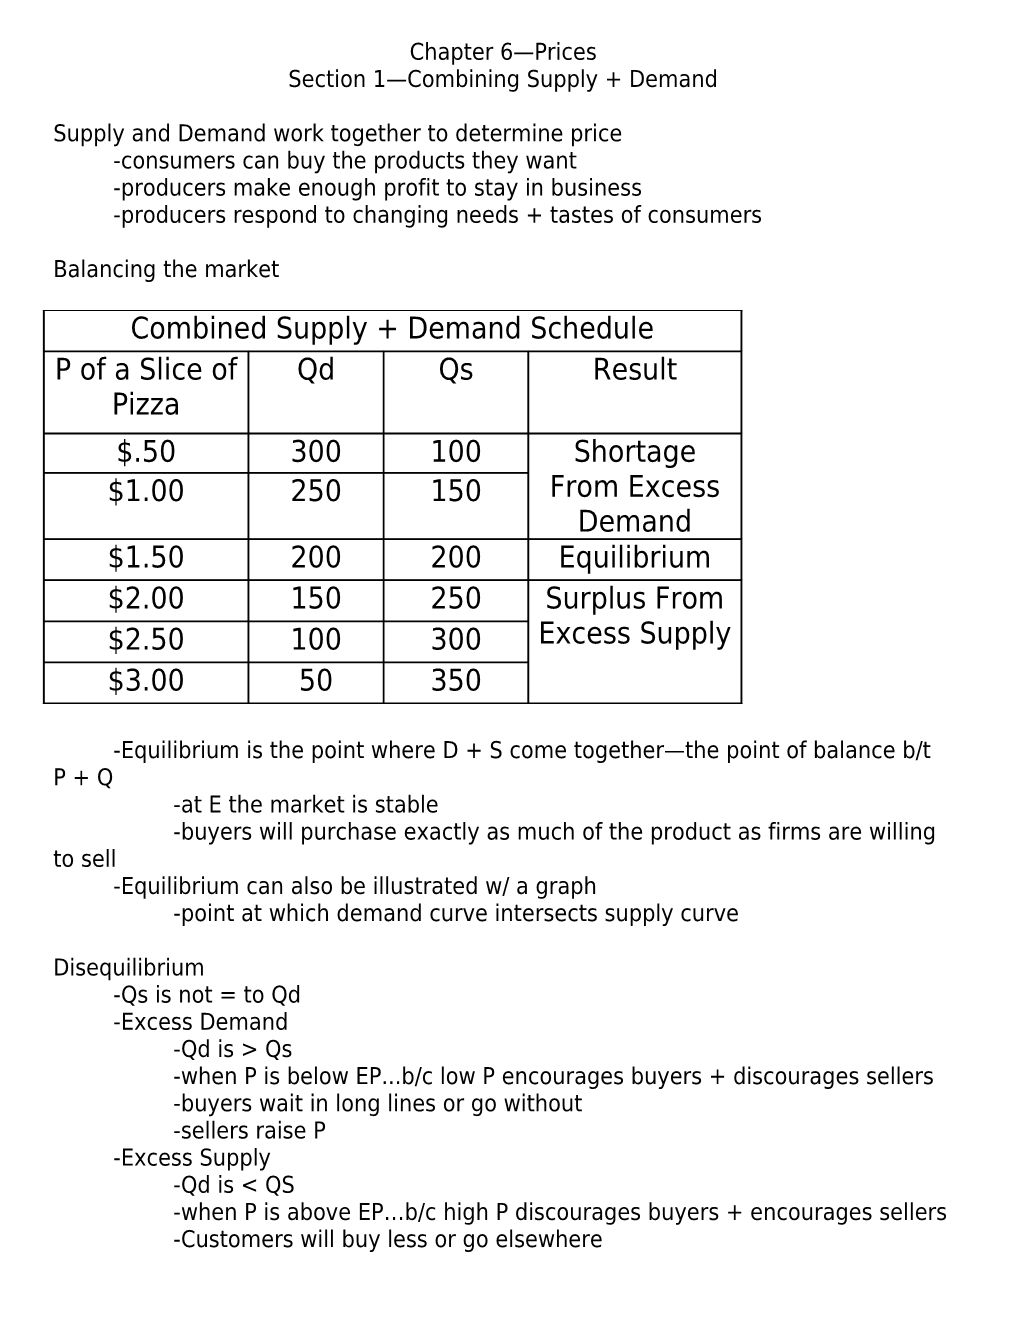 Supply and Demand Work Together to Determine Price